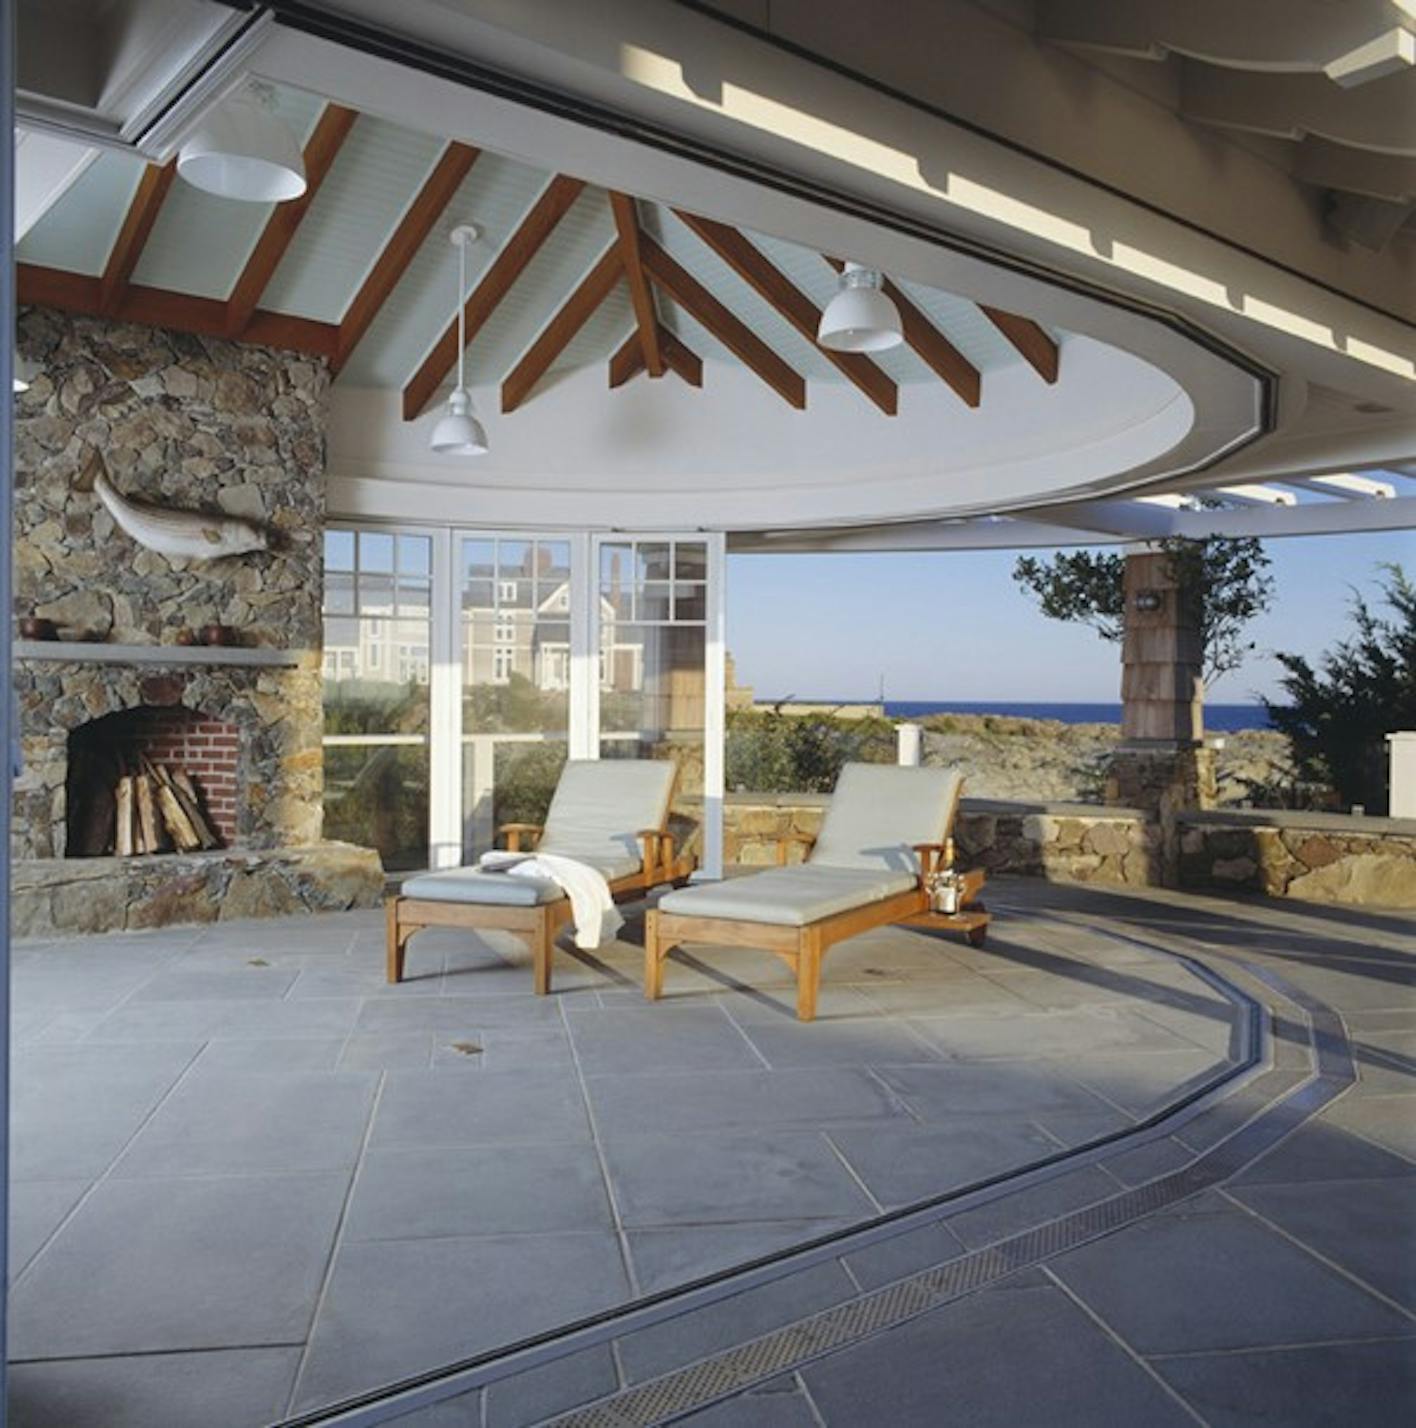 Nanawall Aluminum Framed Sliding Glass Walls with curved systems